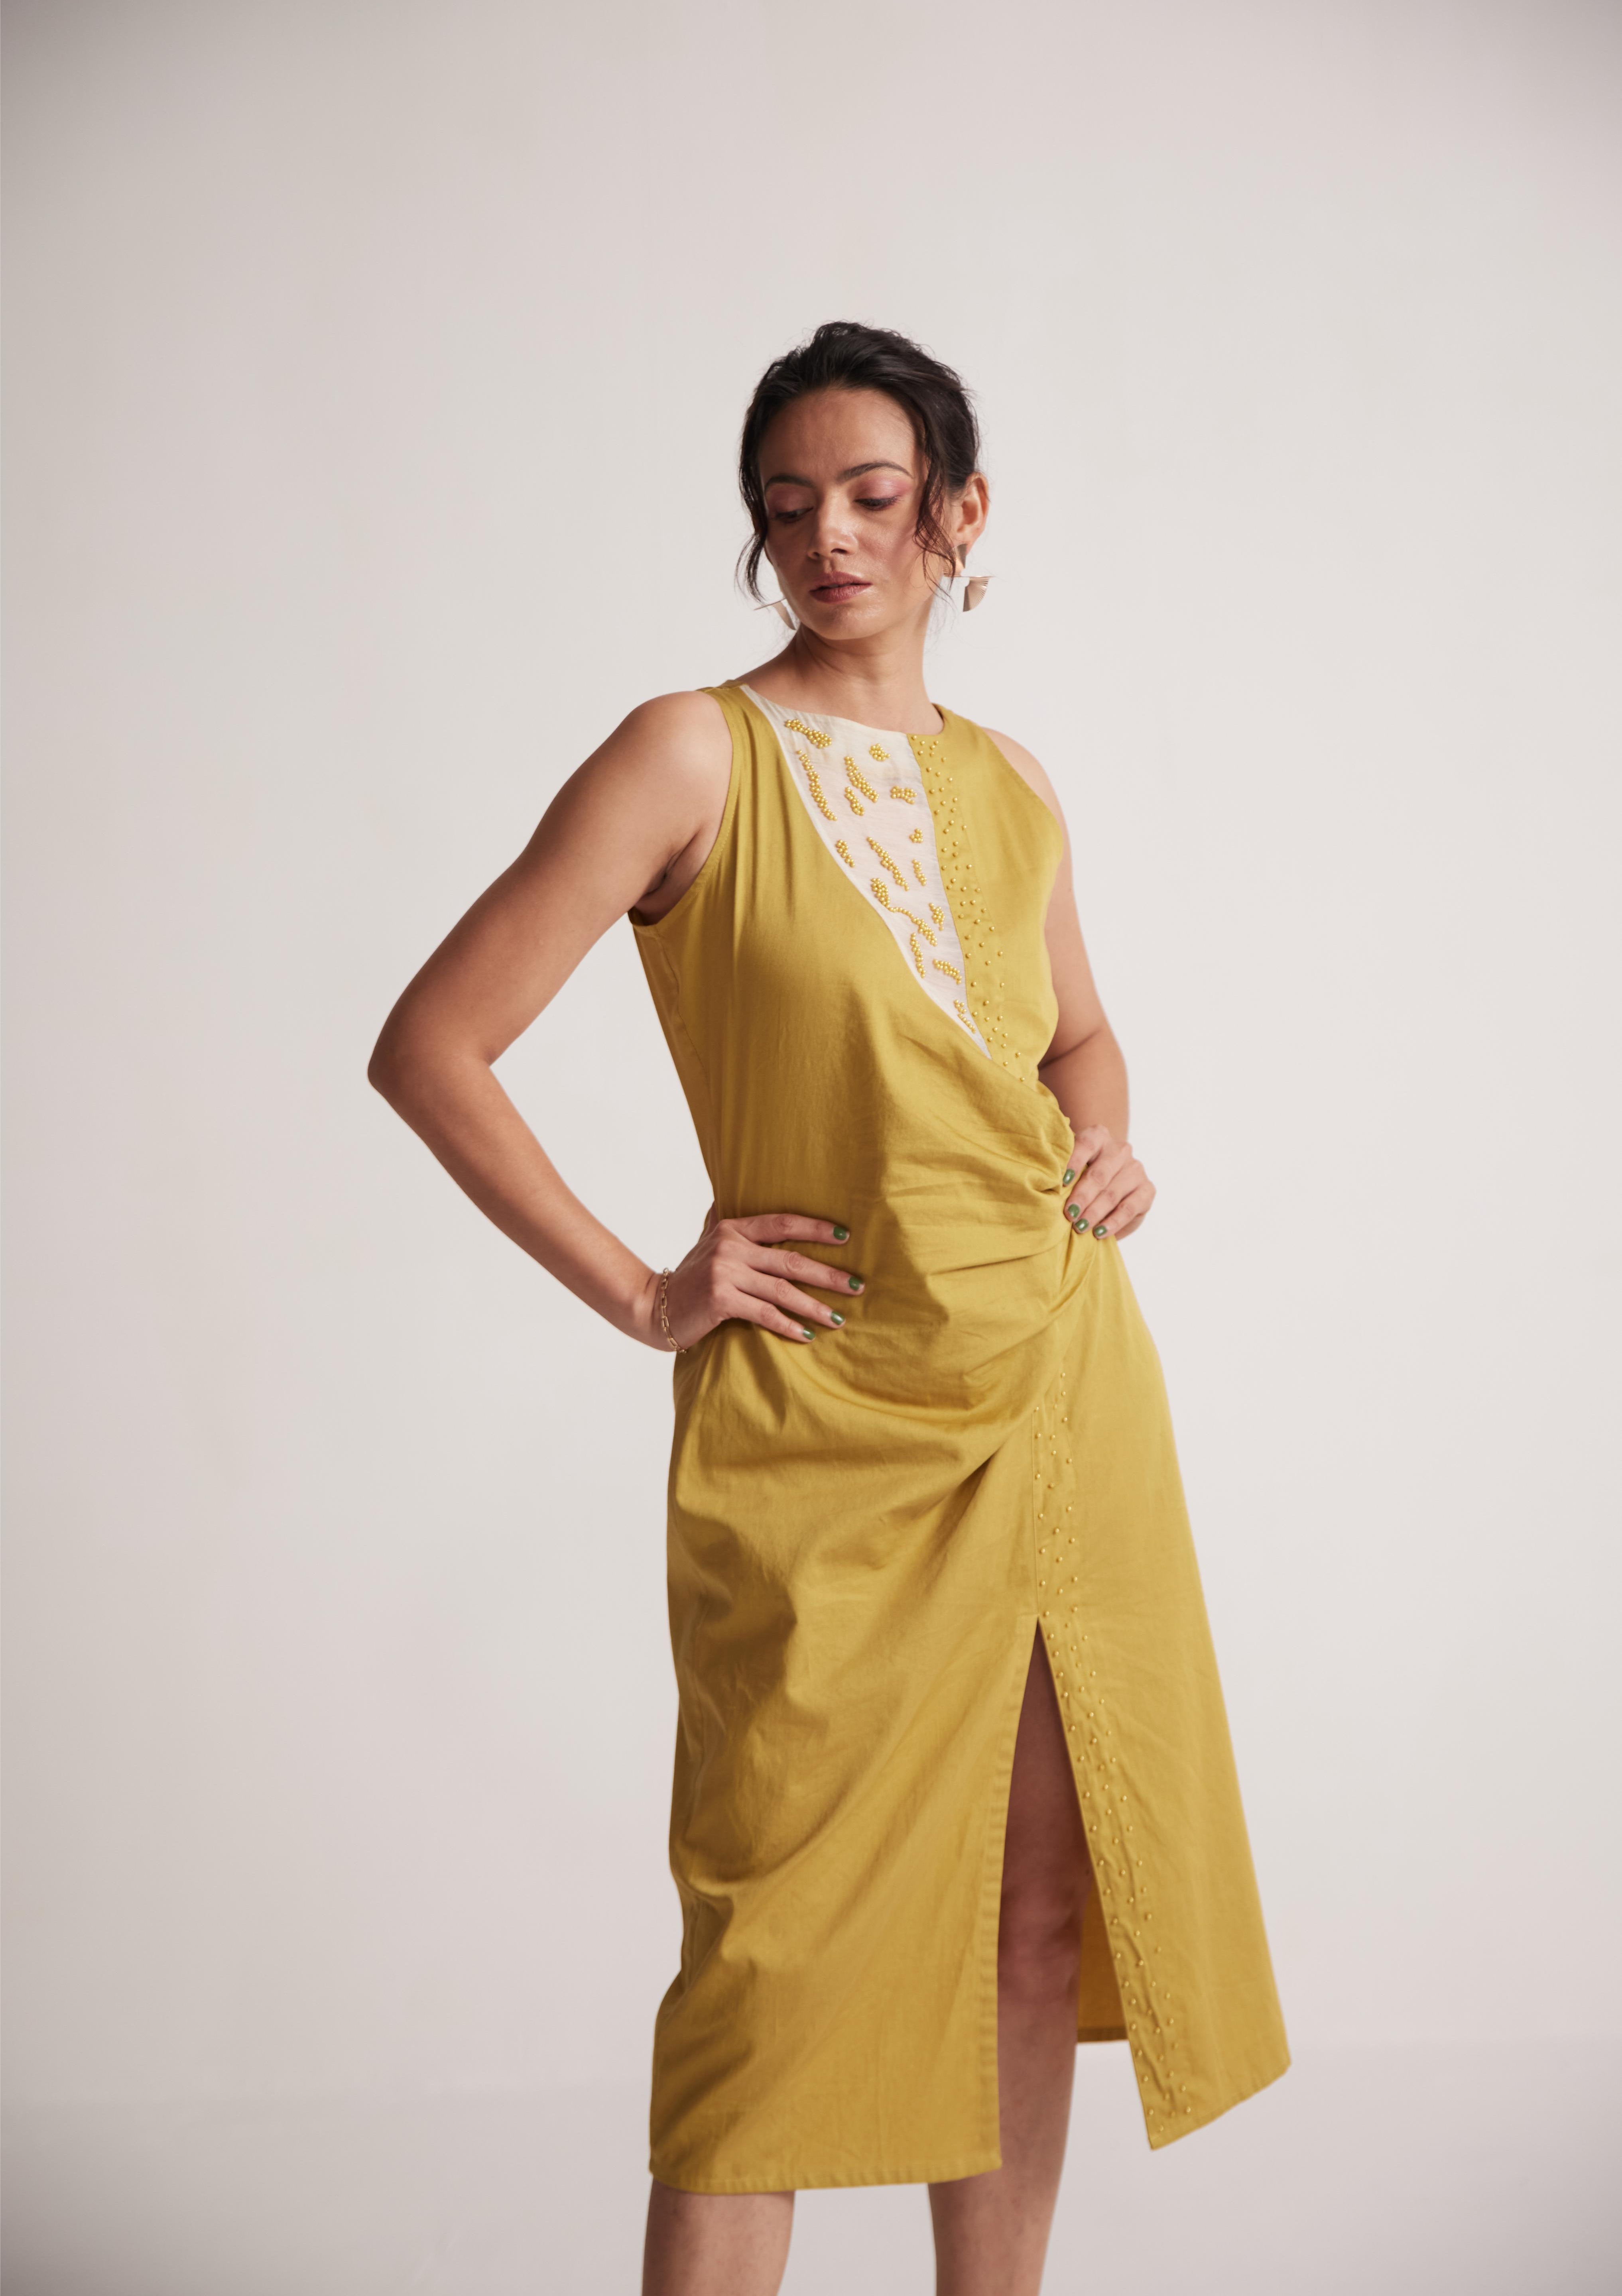 Yellow Mid Dress with Side Drape and Mother Pearls Embellished on The Front Yoke - Western Era  Dresses